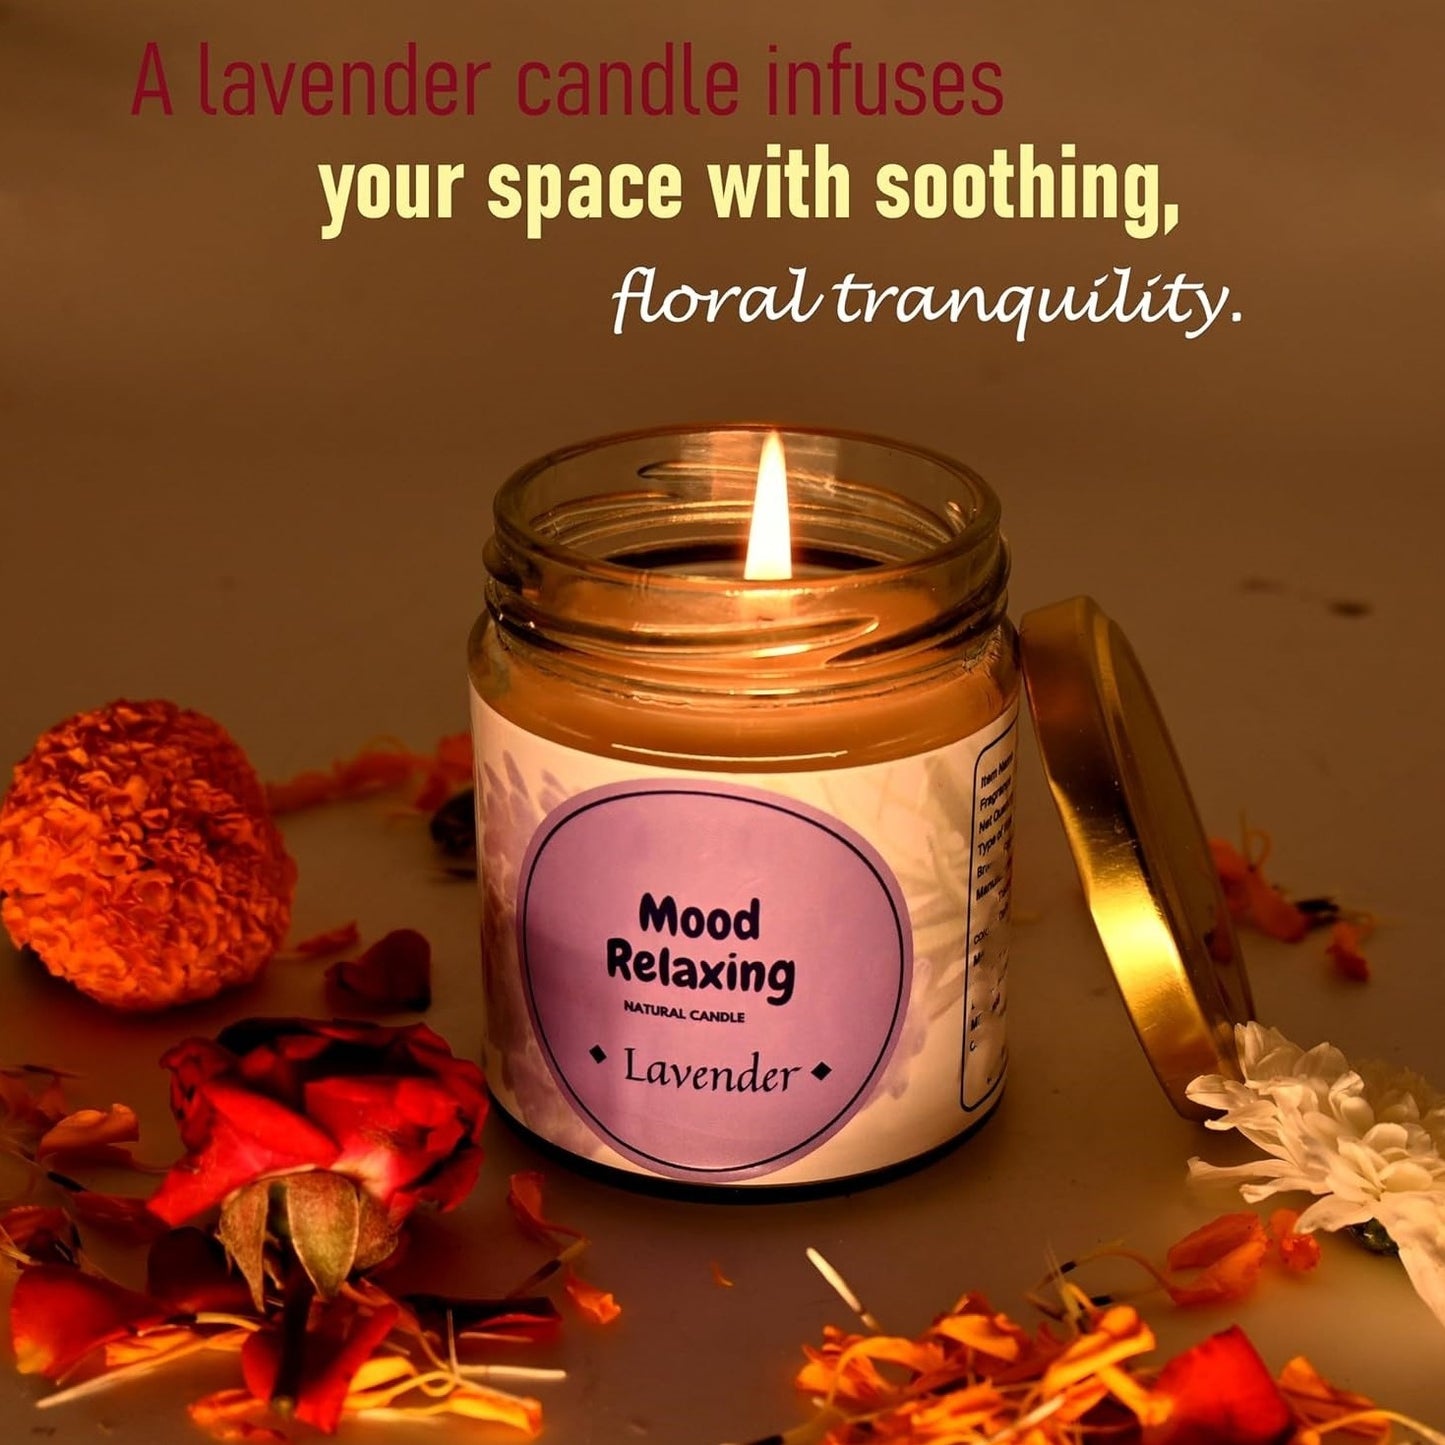 Mood Relaxing Candle